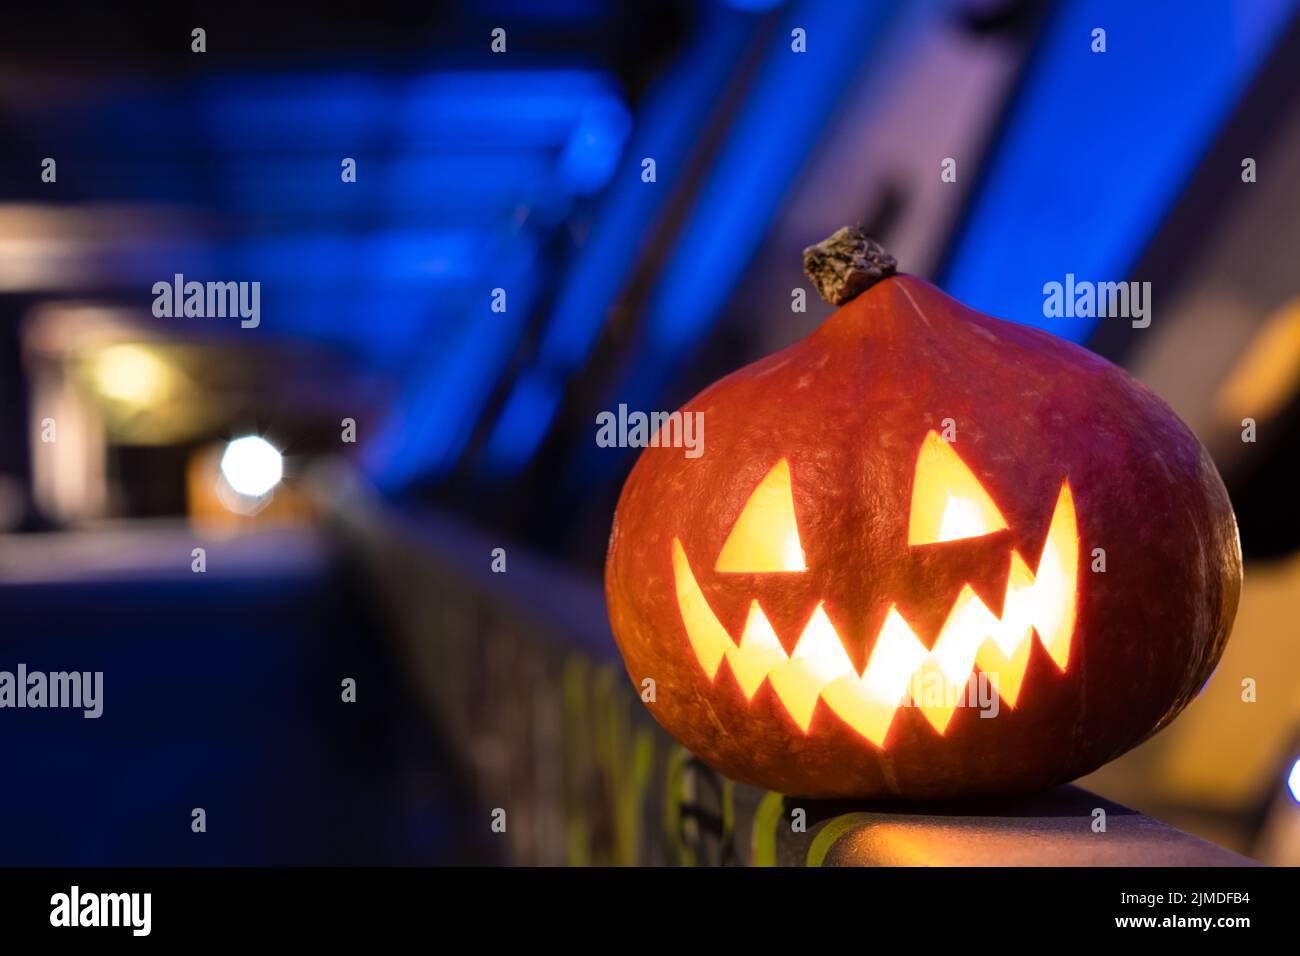 Halloween pumpkin in the dark on a blue industrial abstract background. Blurry colored lights. Stock Photo